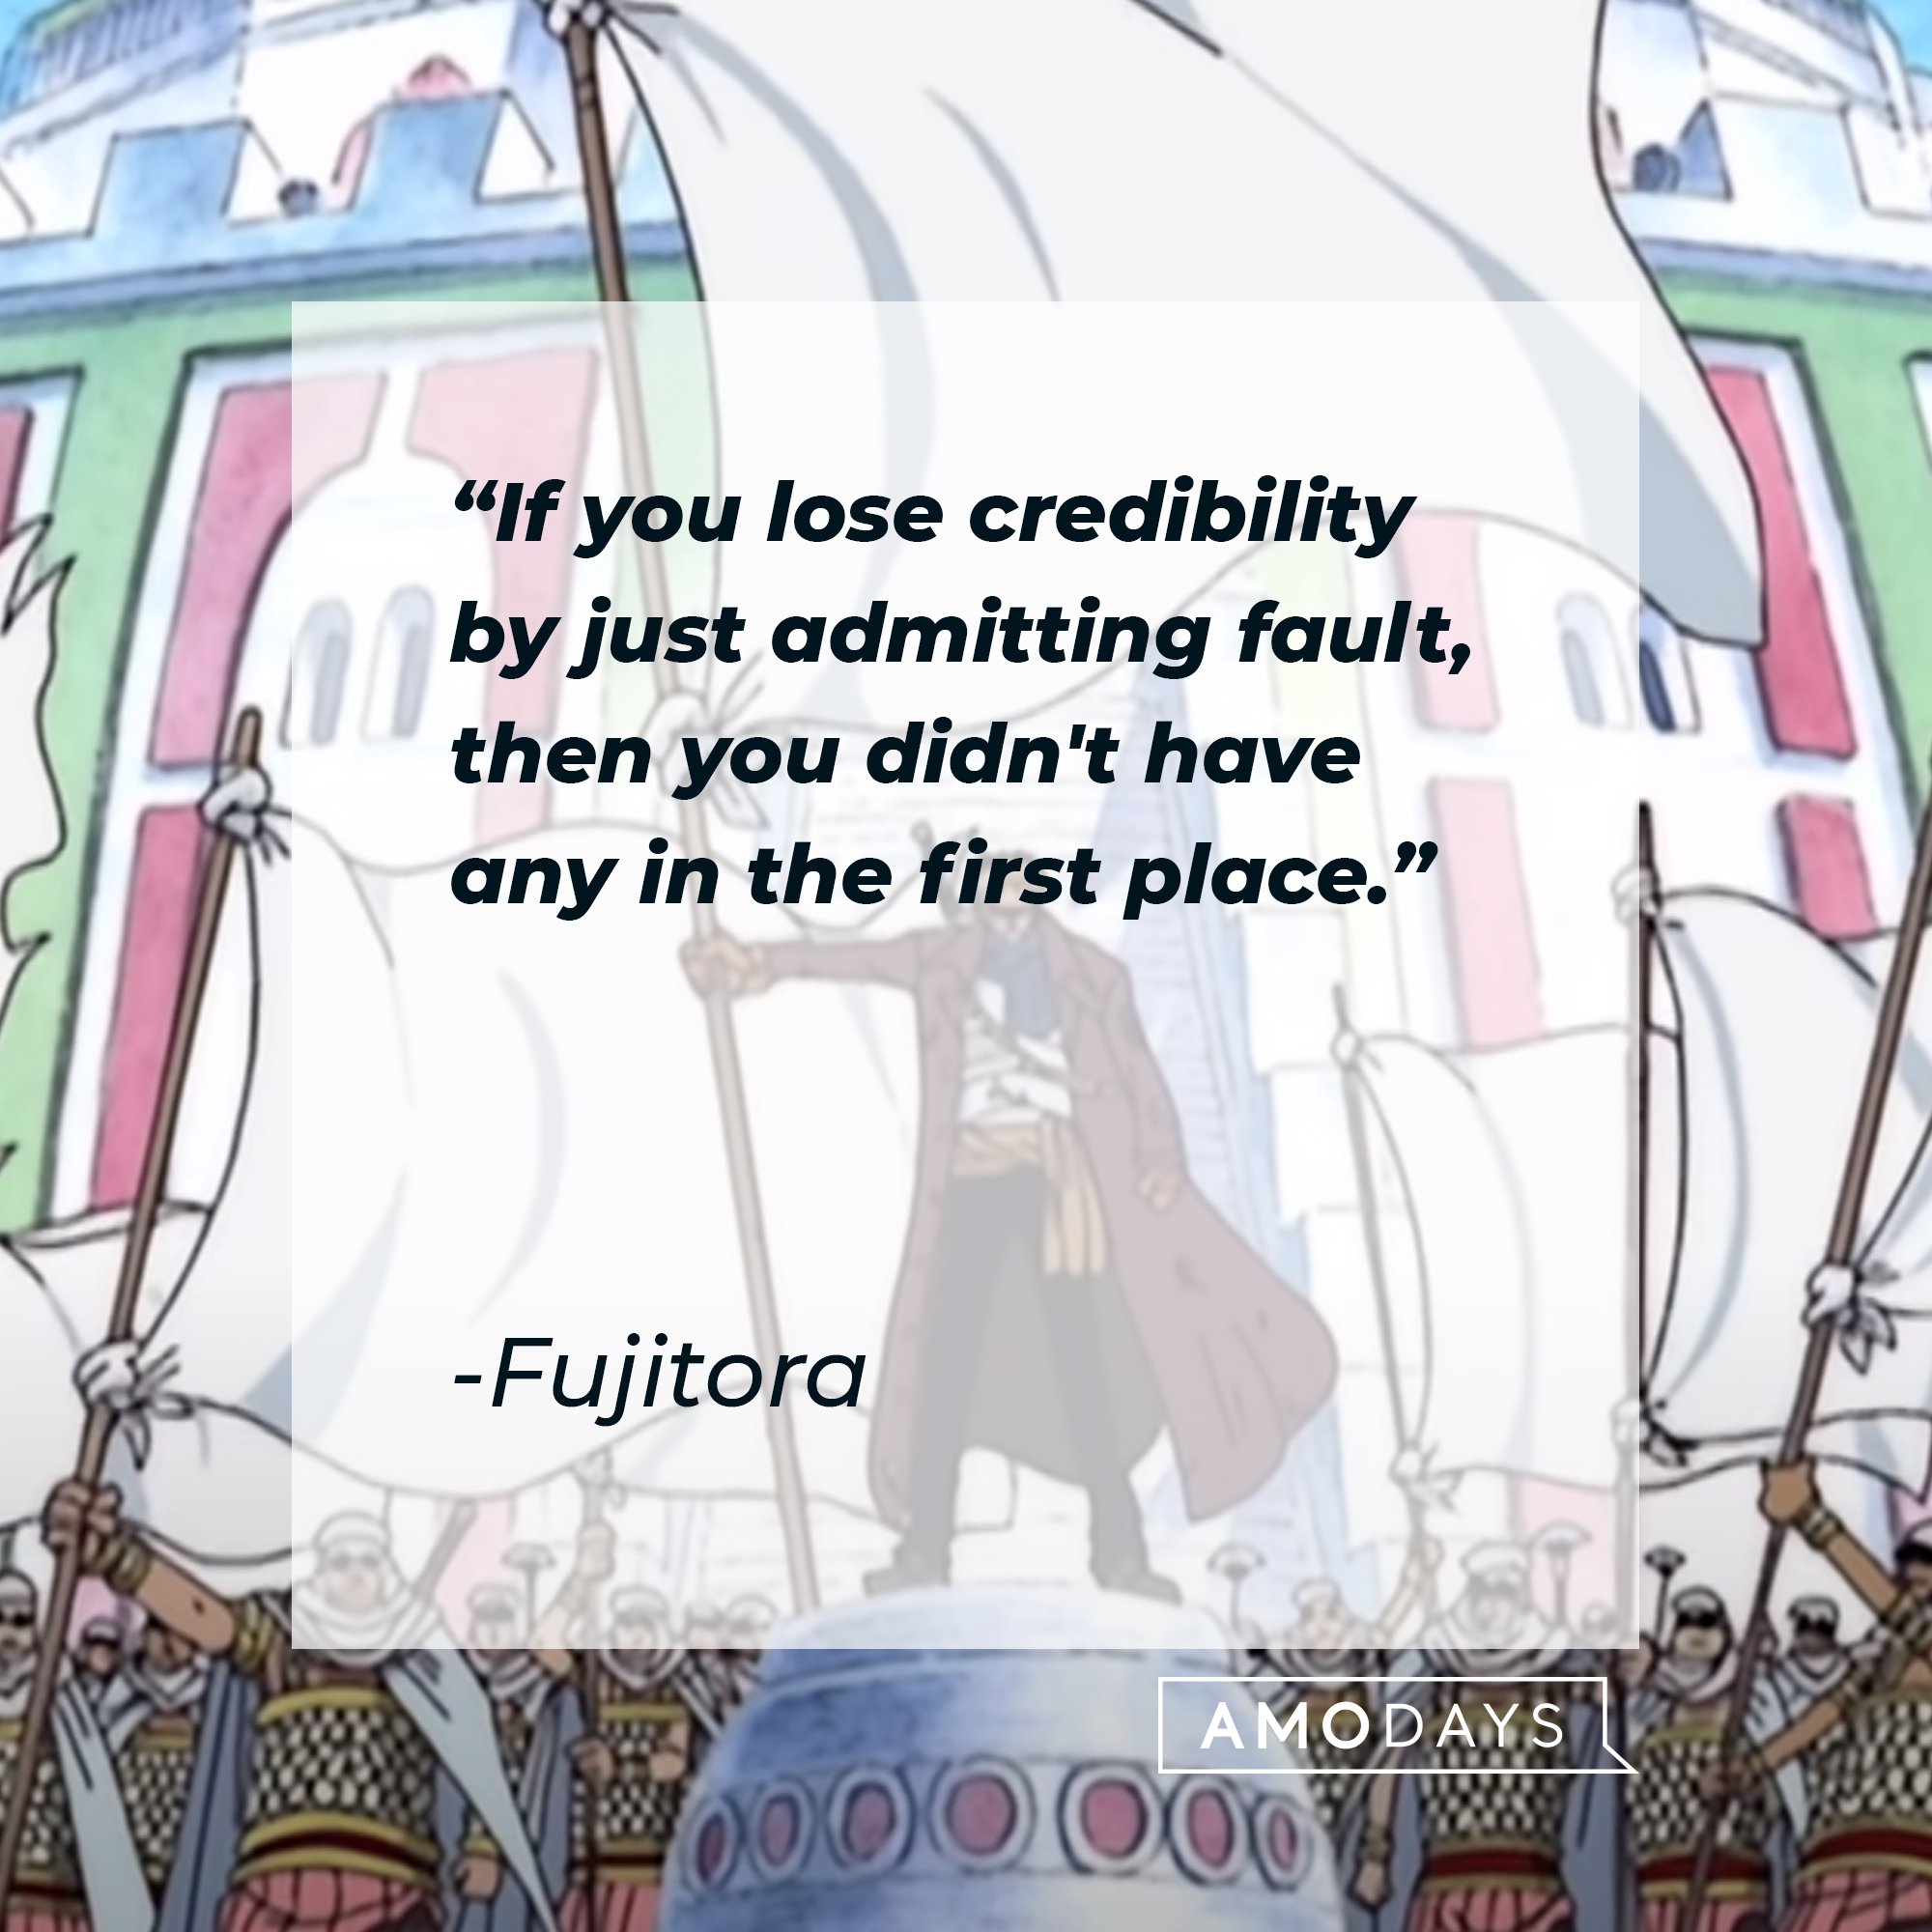 Fujitora’s quote: "If you lose credibility by just admitting fault, then you didn't have any in the first place."  | Image: AmoDays